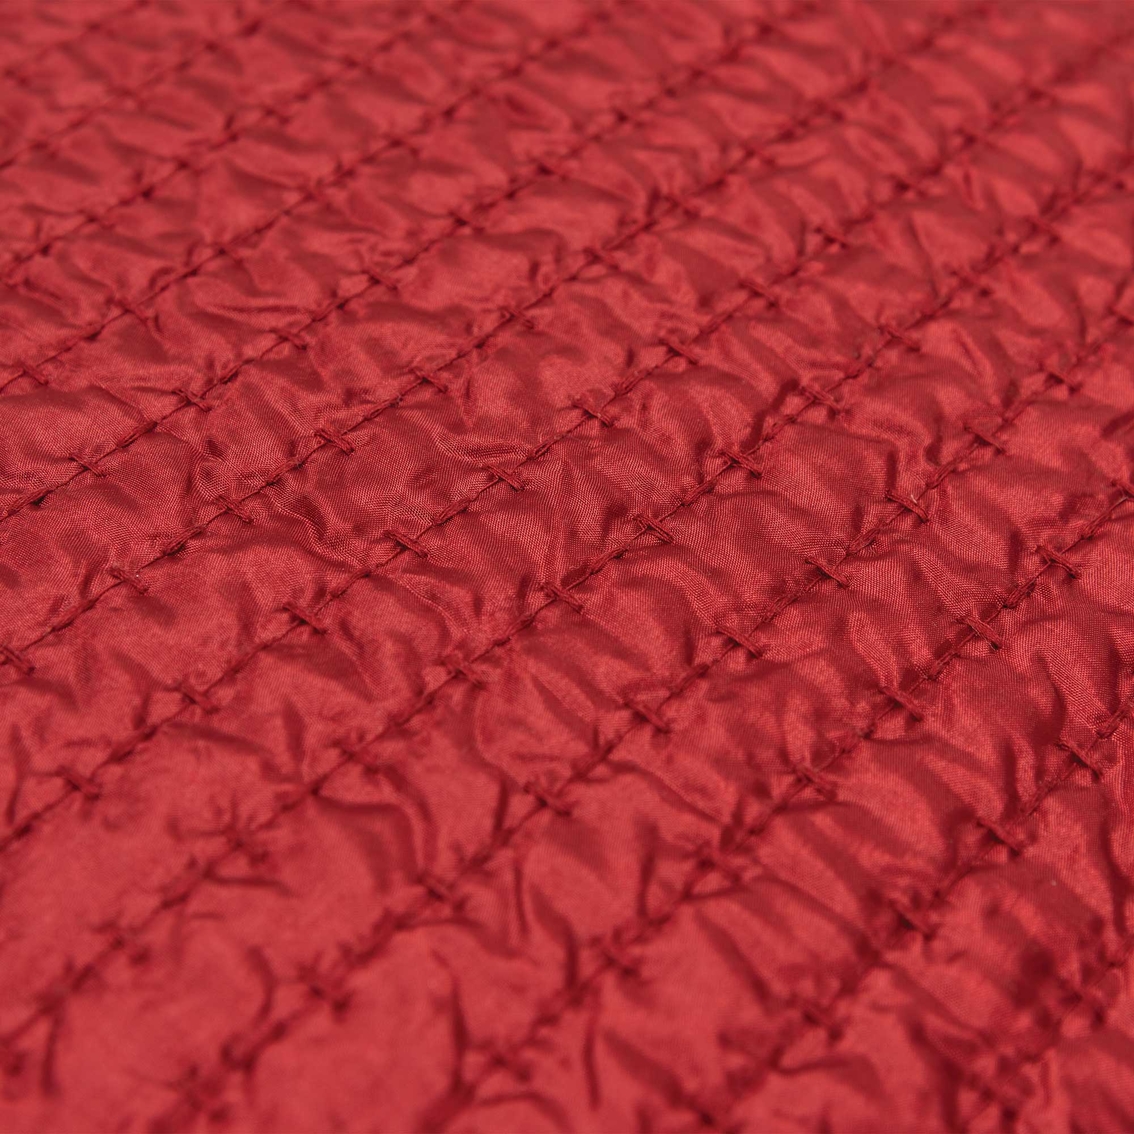 Rizzy Home Solid Deep Red Polyester Filled Pillow - Image 5 of 5